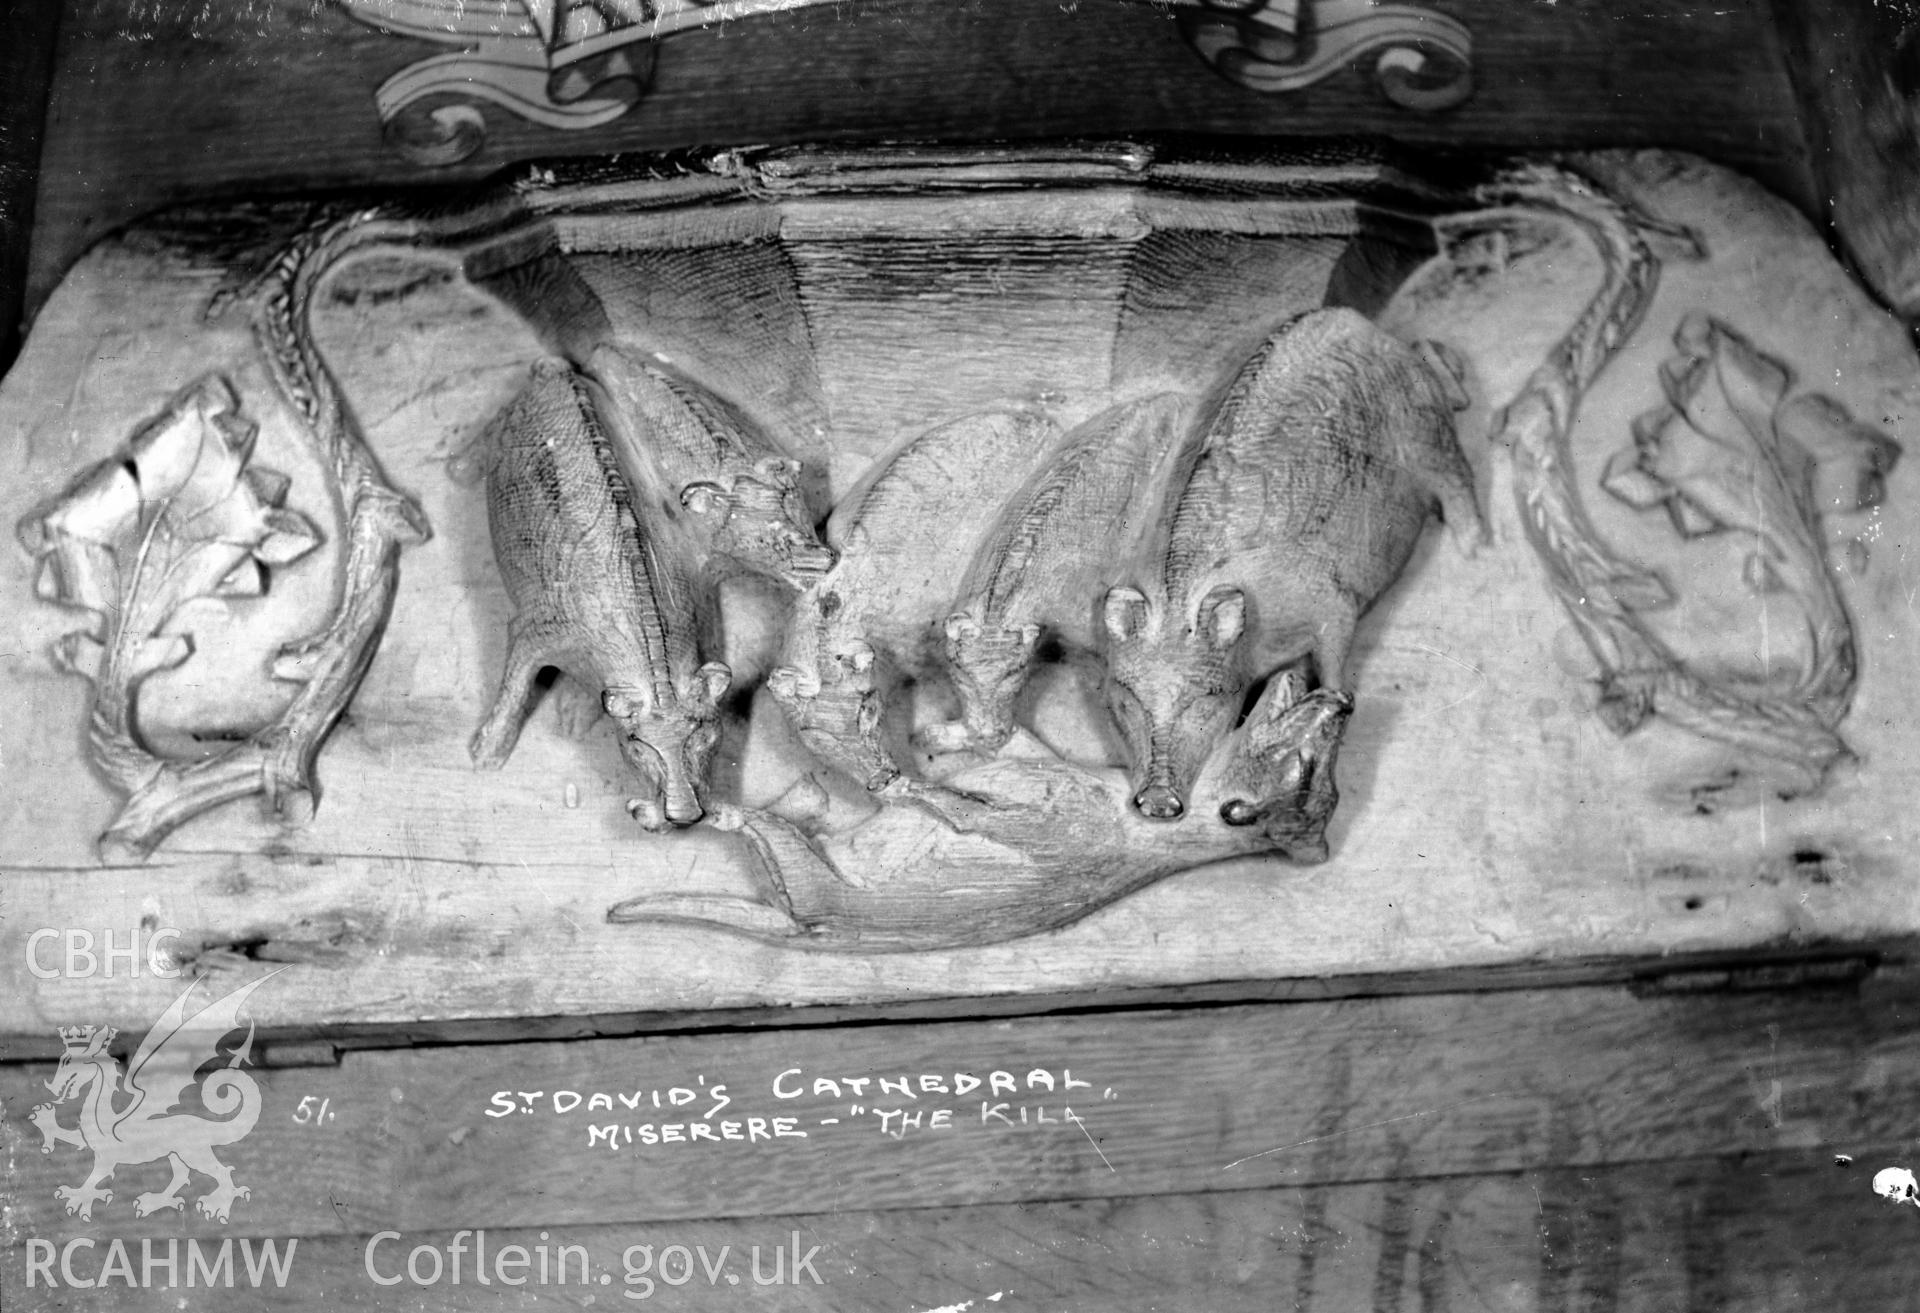 Detail of miserere at St Davids Cathedral showing animals at "the kill".